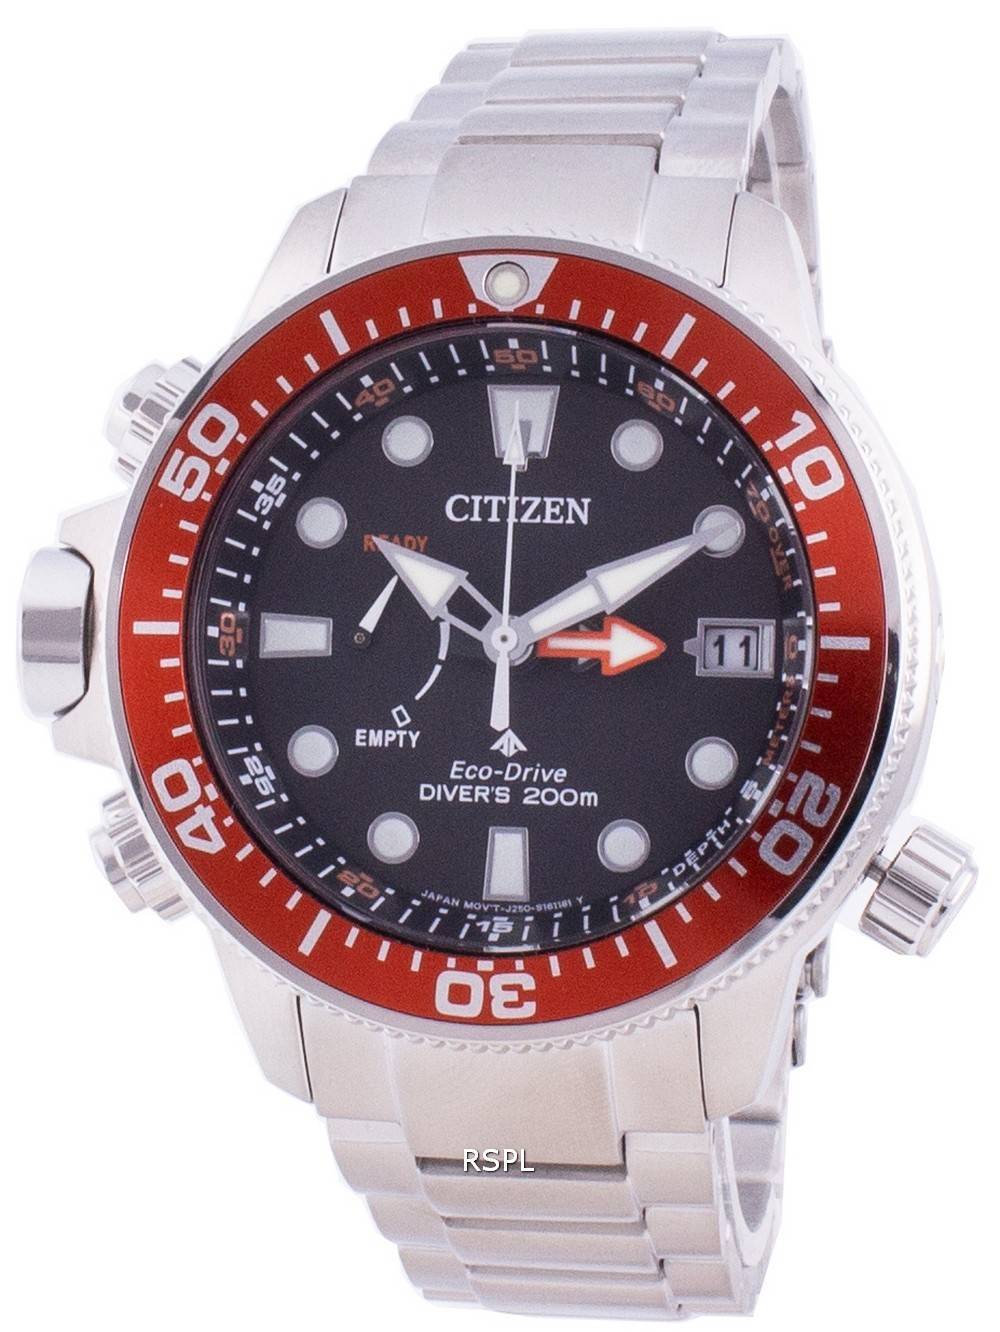 Watch Wednesday: This Citizen Dive Watch Is On Sale For Only $400 And Is  About To Sell Out At Huckberry! - BroBible